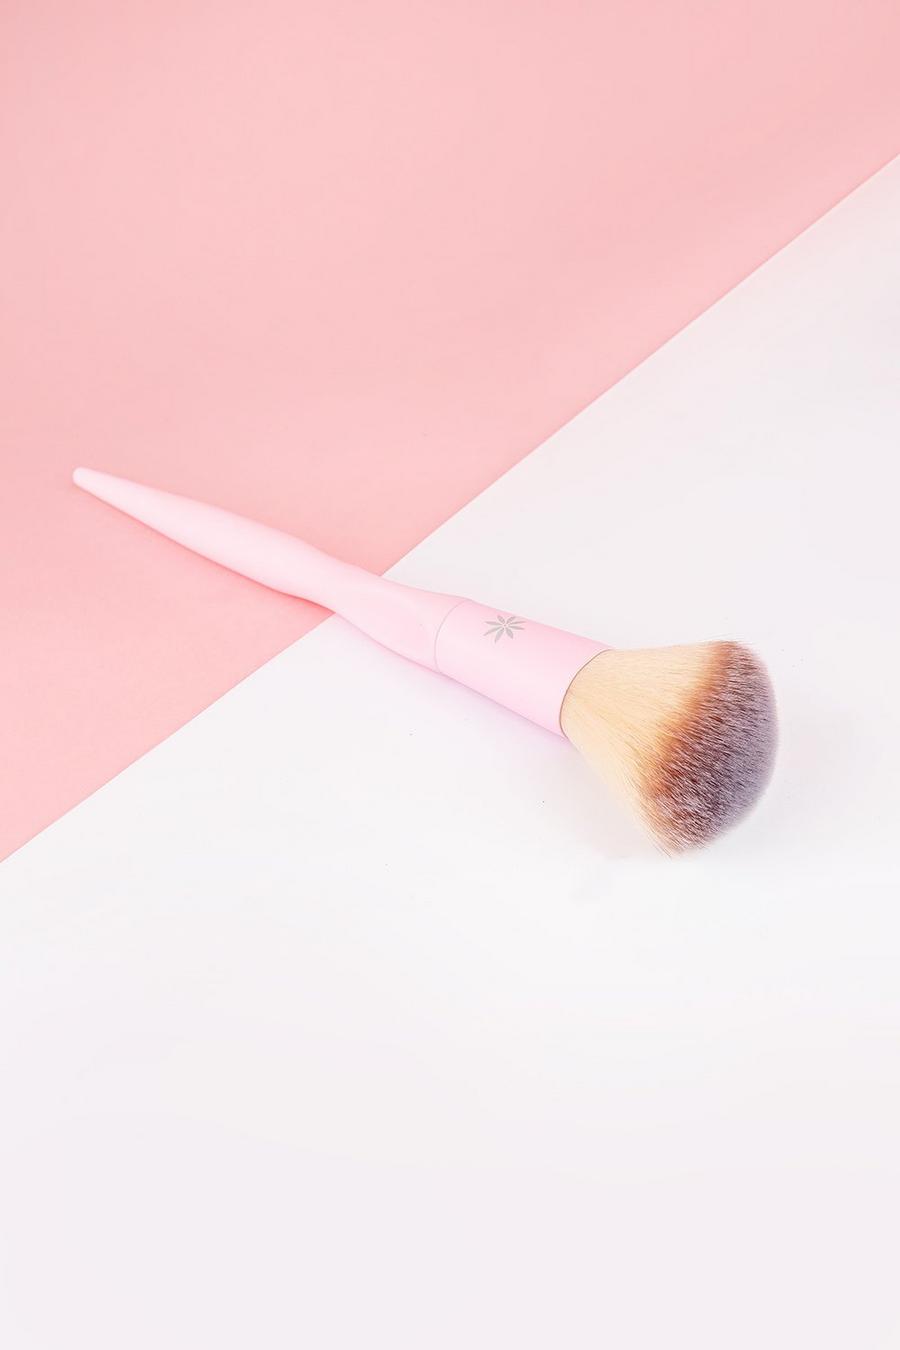 Brushworks - Pinceau pour contouring , Baby pink rose